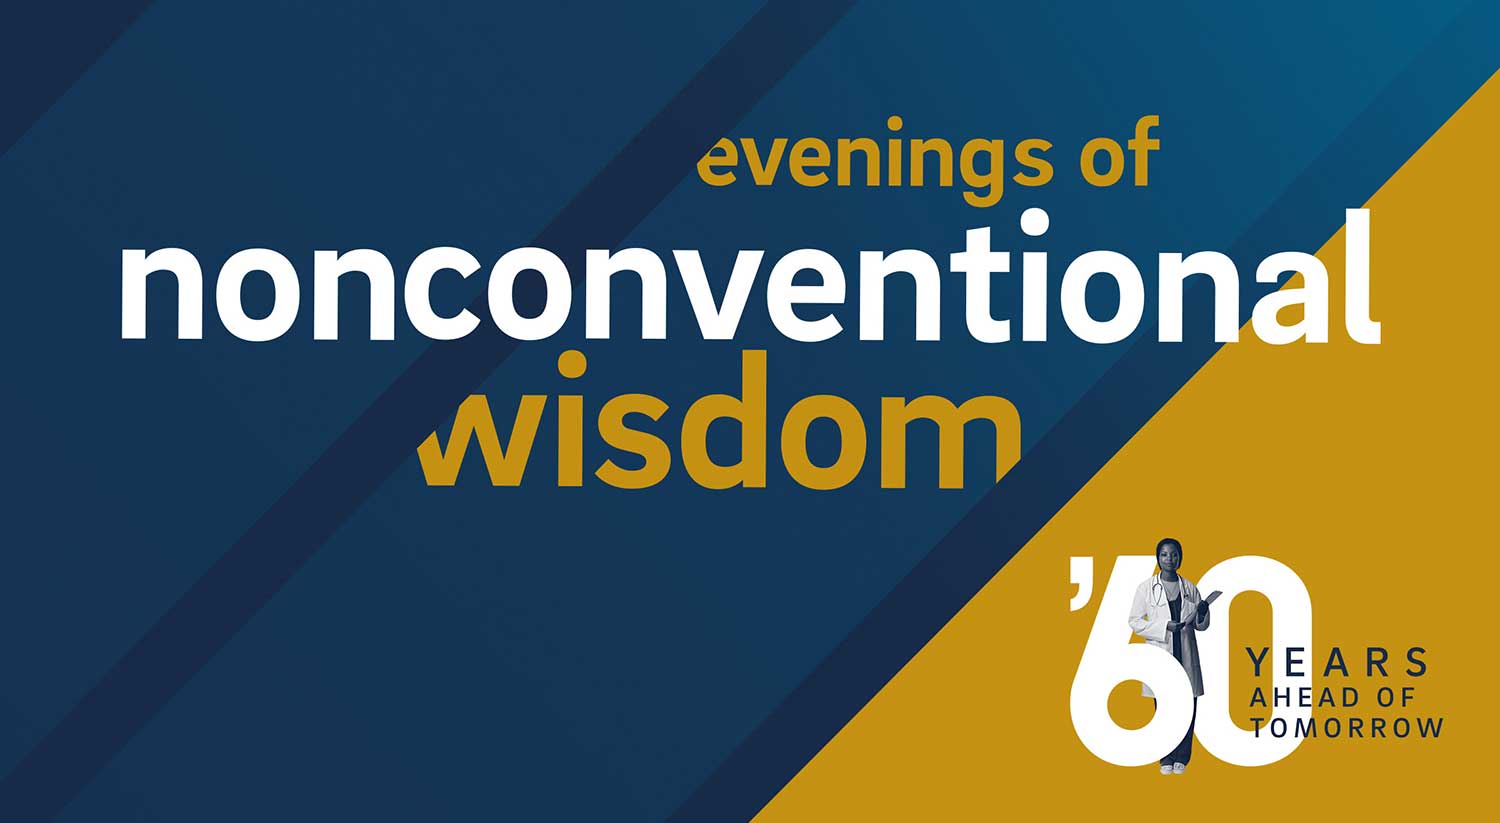 Evenings of Nonconventional Wisdom gif